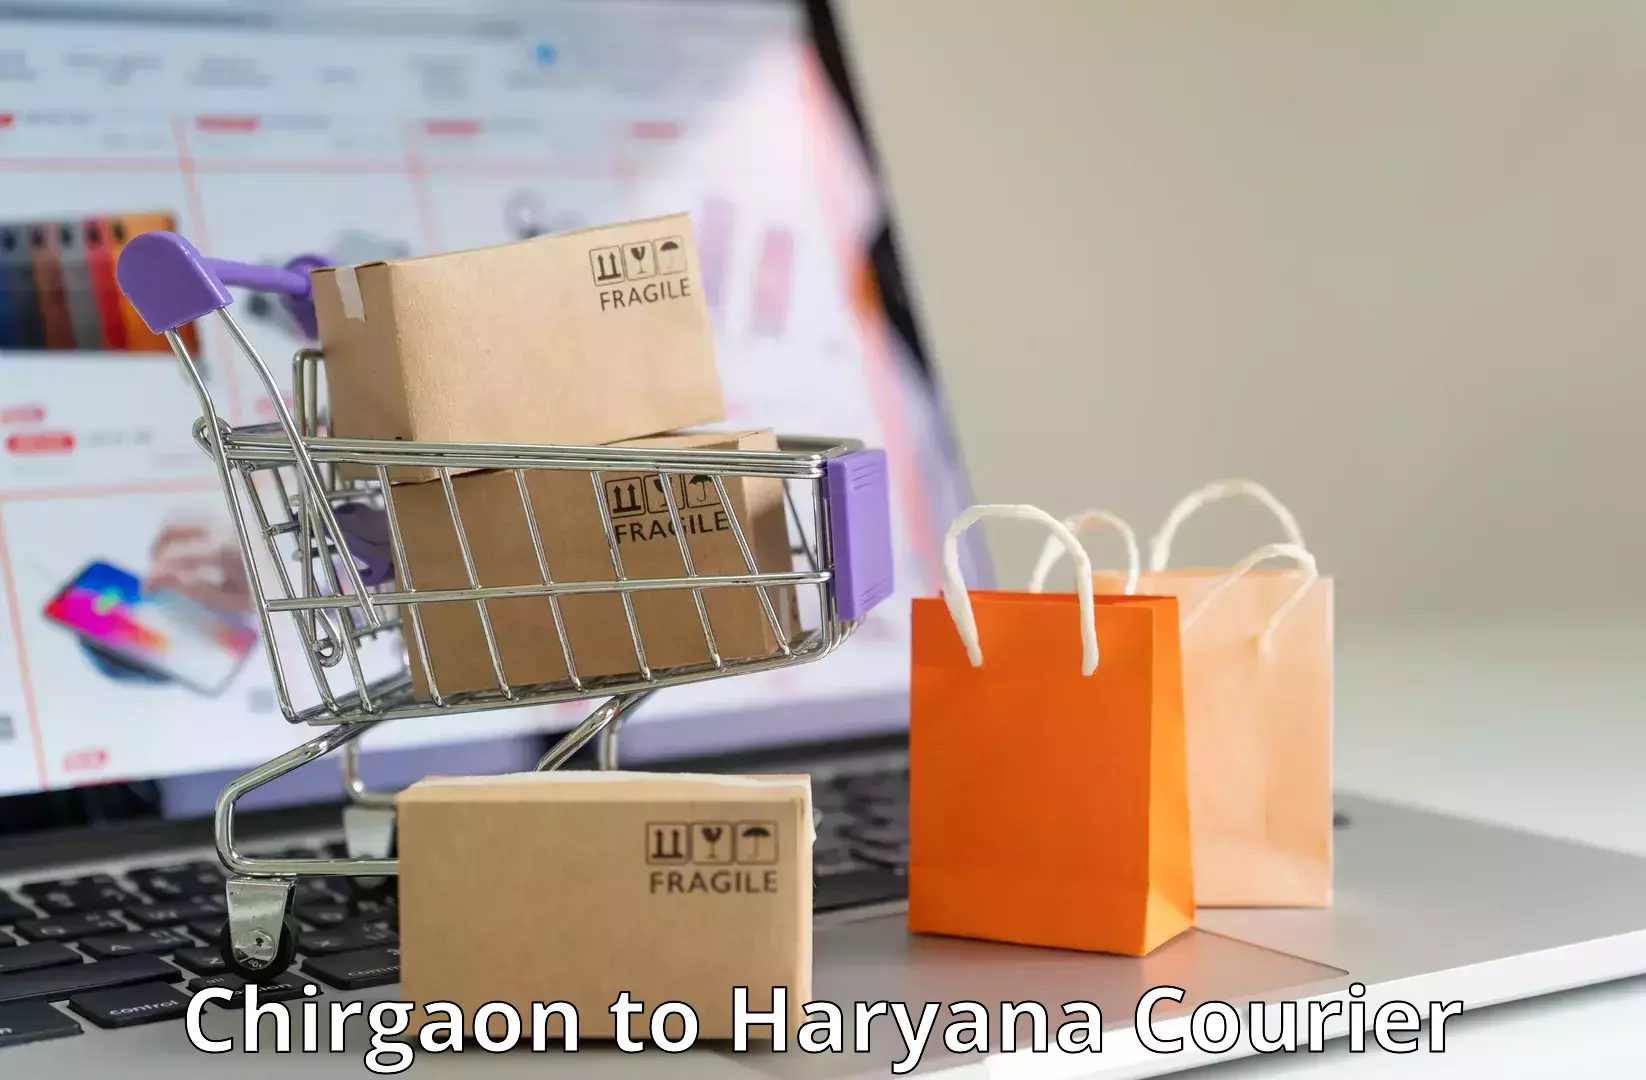 Courier service partnerships Chirgaon to Karnal